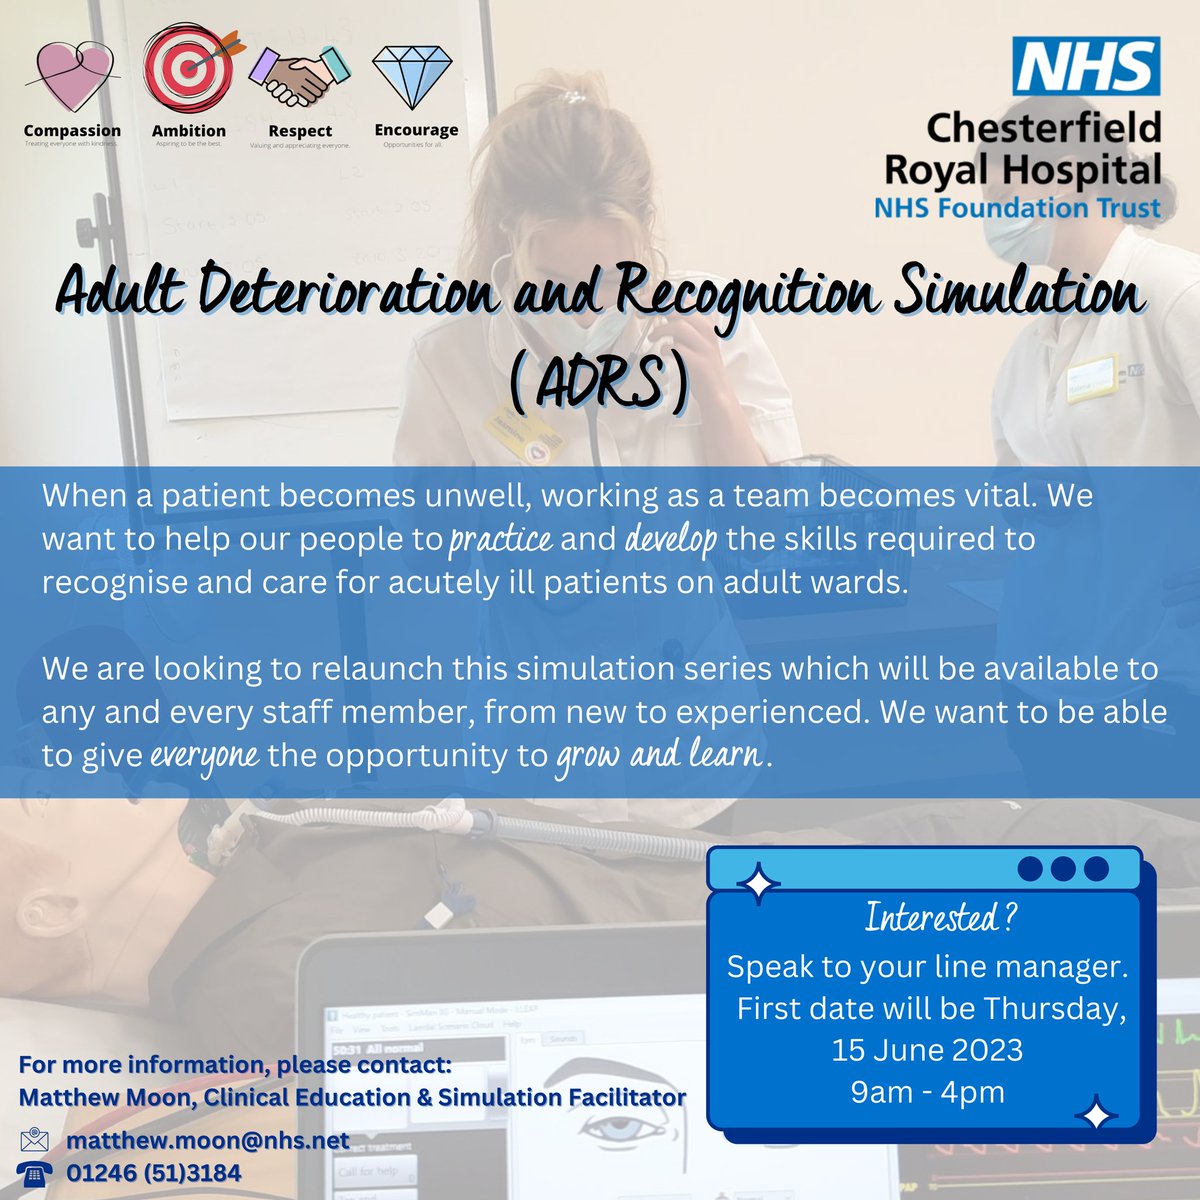 Adult Deterioration and Recognition Simulation (ADRS) 📆 Thursday, 15 June 2023 ⏰ 9am - 4pm 📍 Lecture Room A & B, Education Centre, @royalhospital For more information, please contact @RNMatthewMoon1